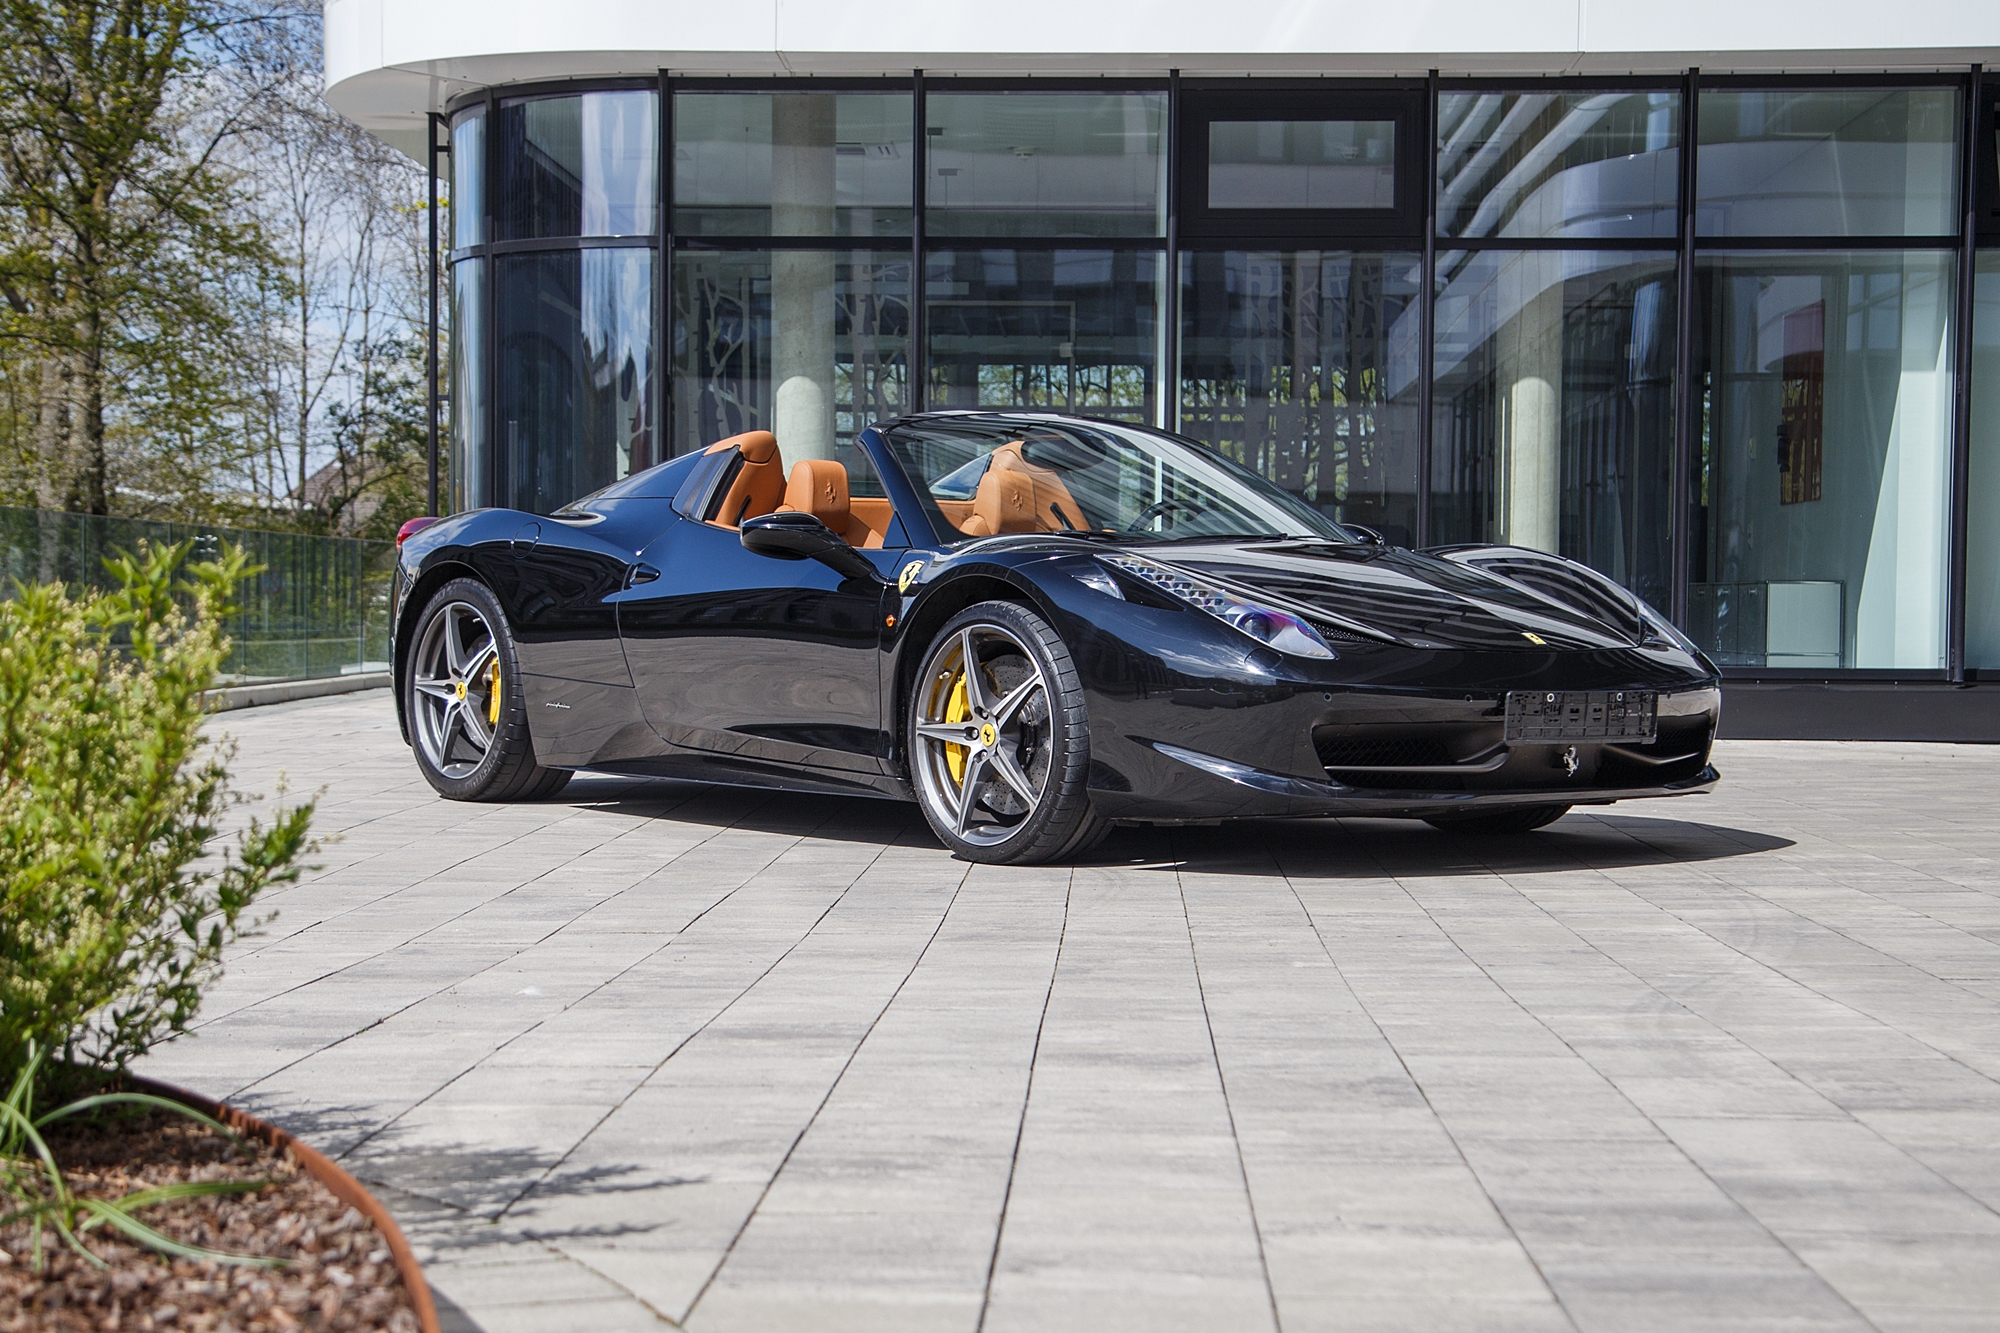 2011 FERRARI 458 SPIDER for sale by auction in Verl, Germany